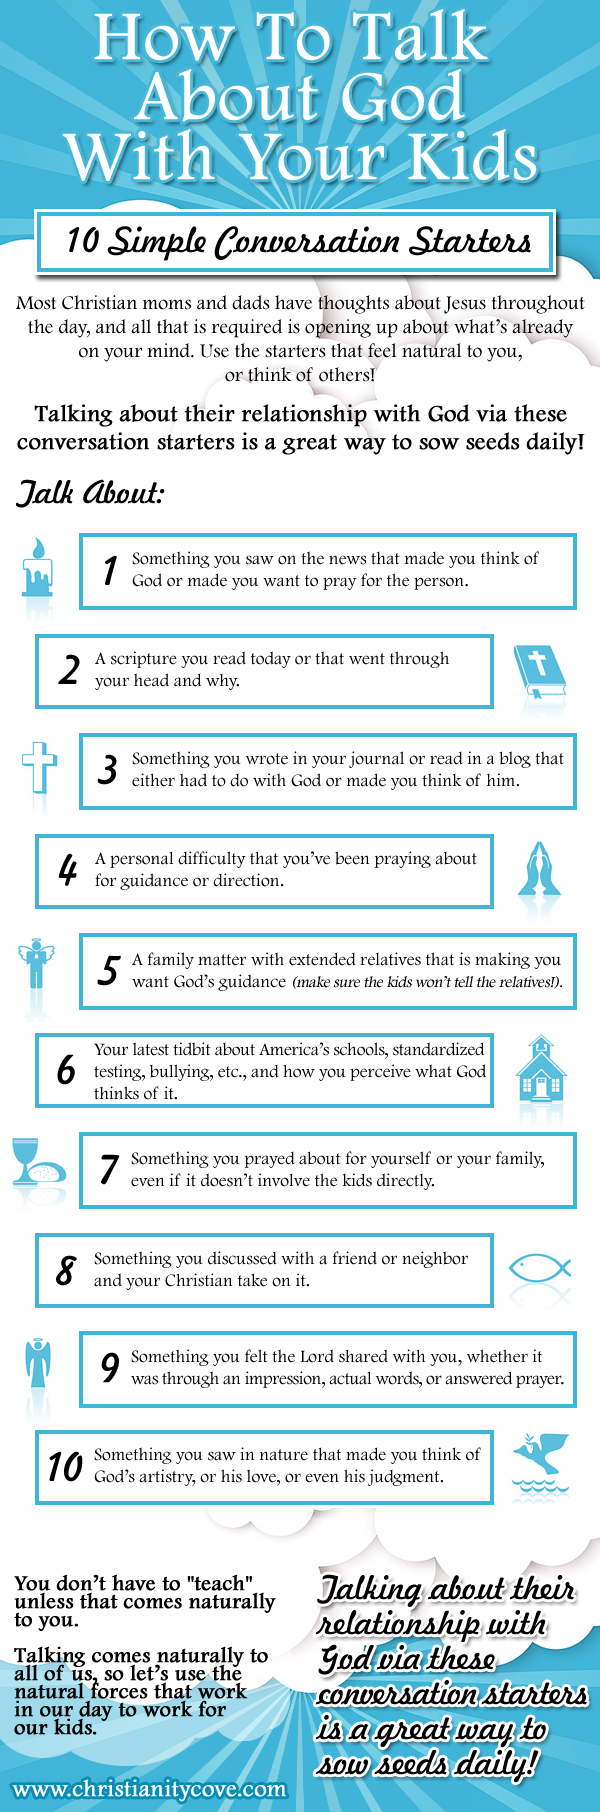 How To Talk About God With Your Kids